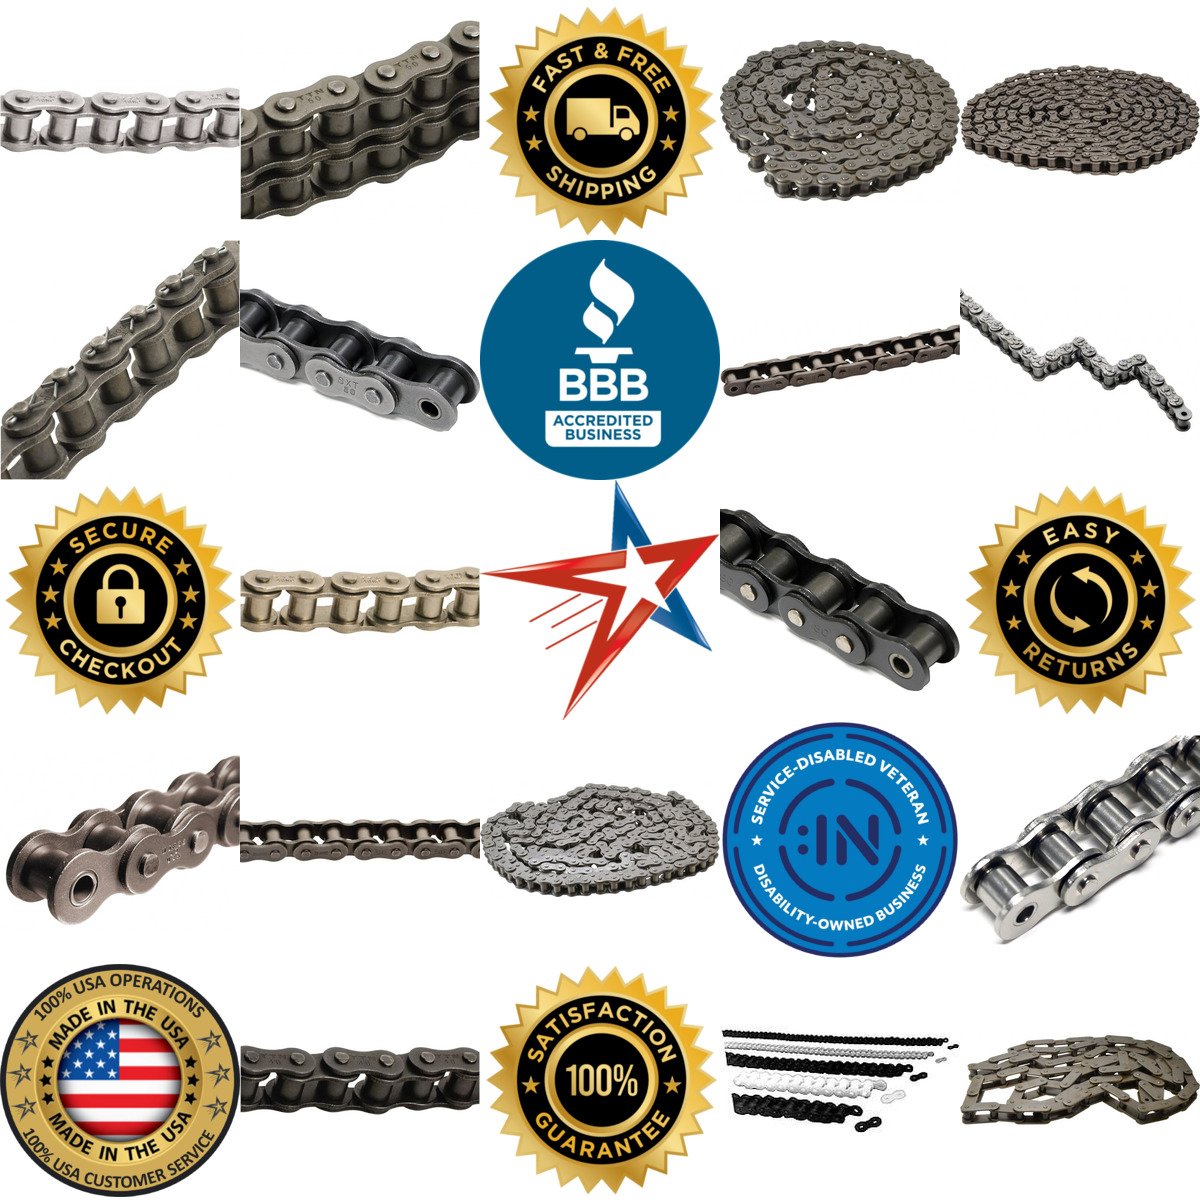 A selection of Roller Chain products on GoVets